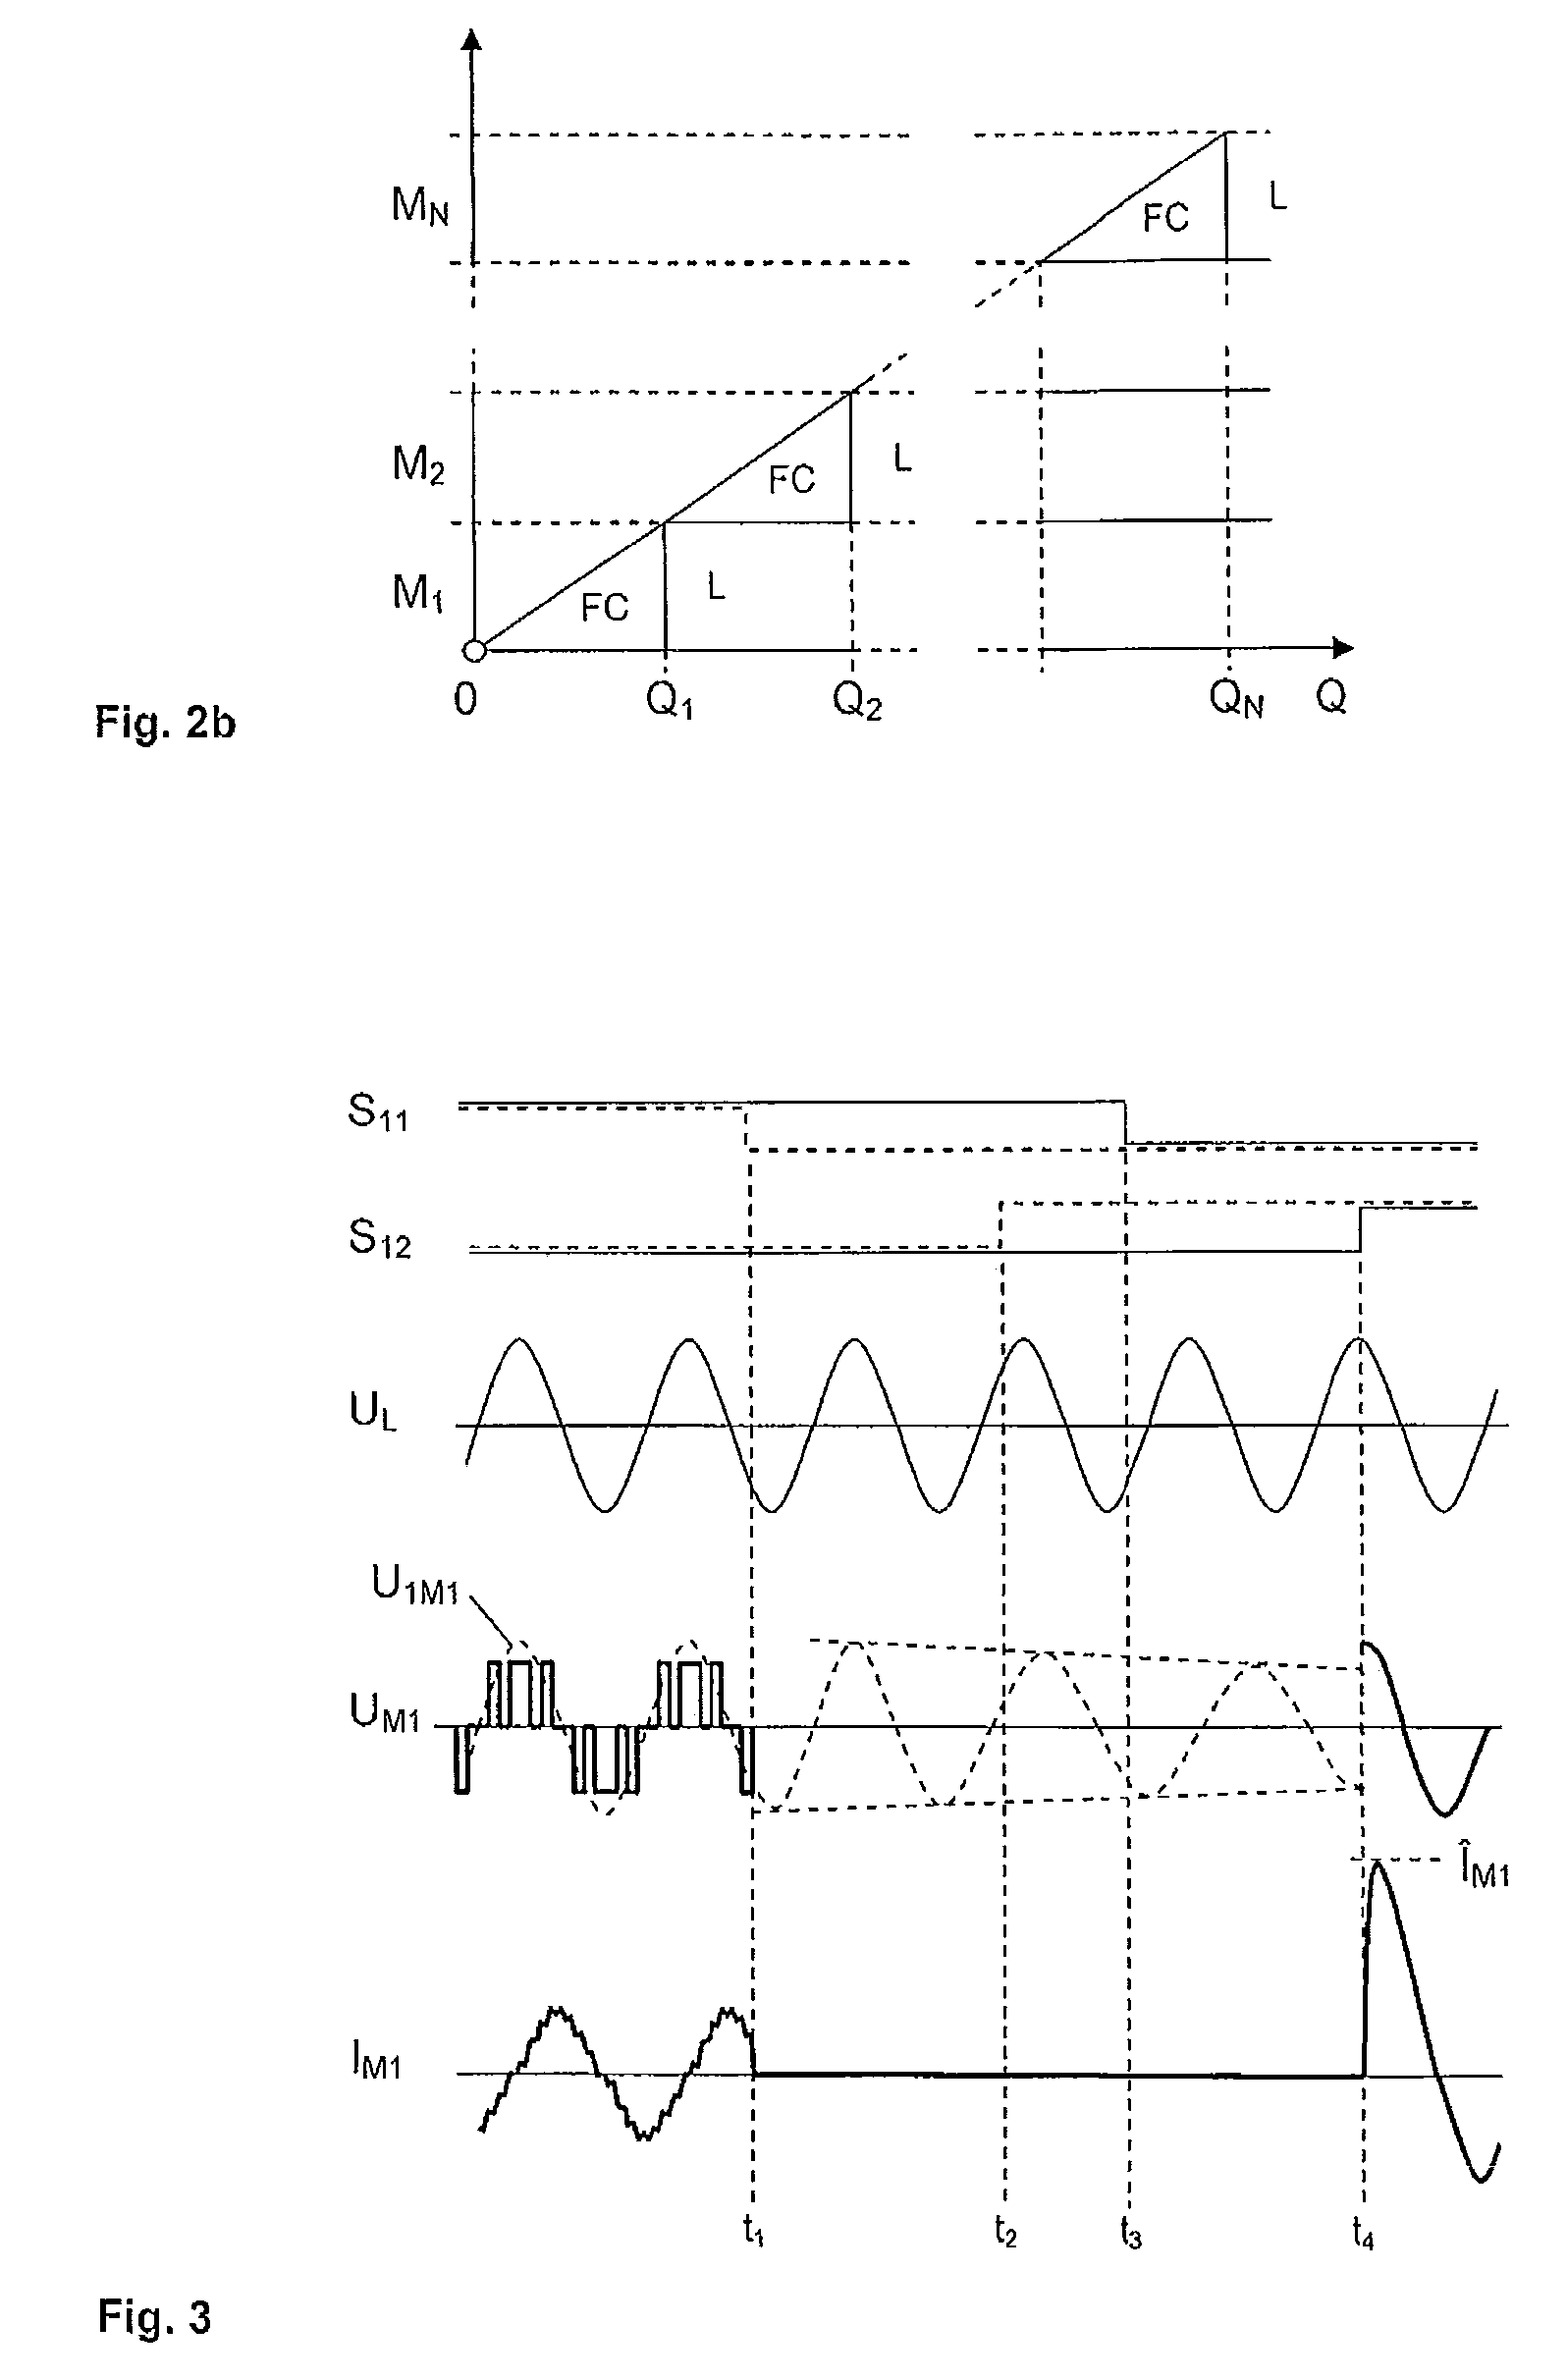 Connection of an electric motor to a supply network